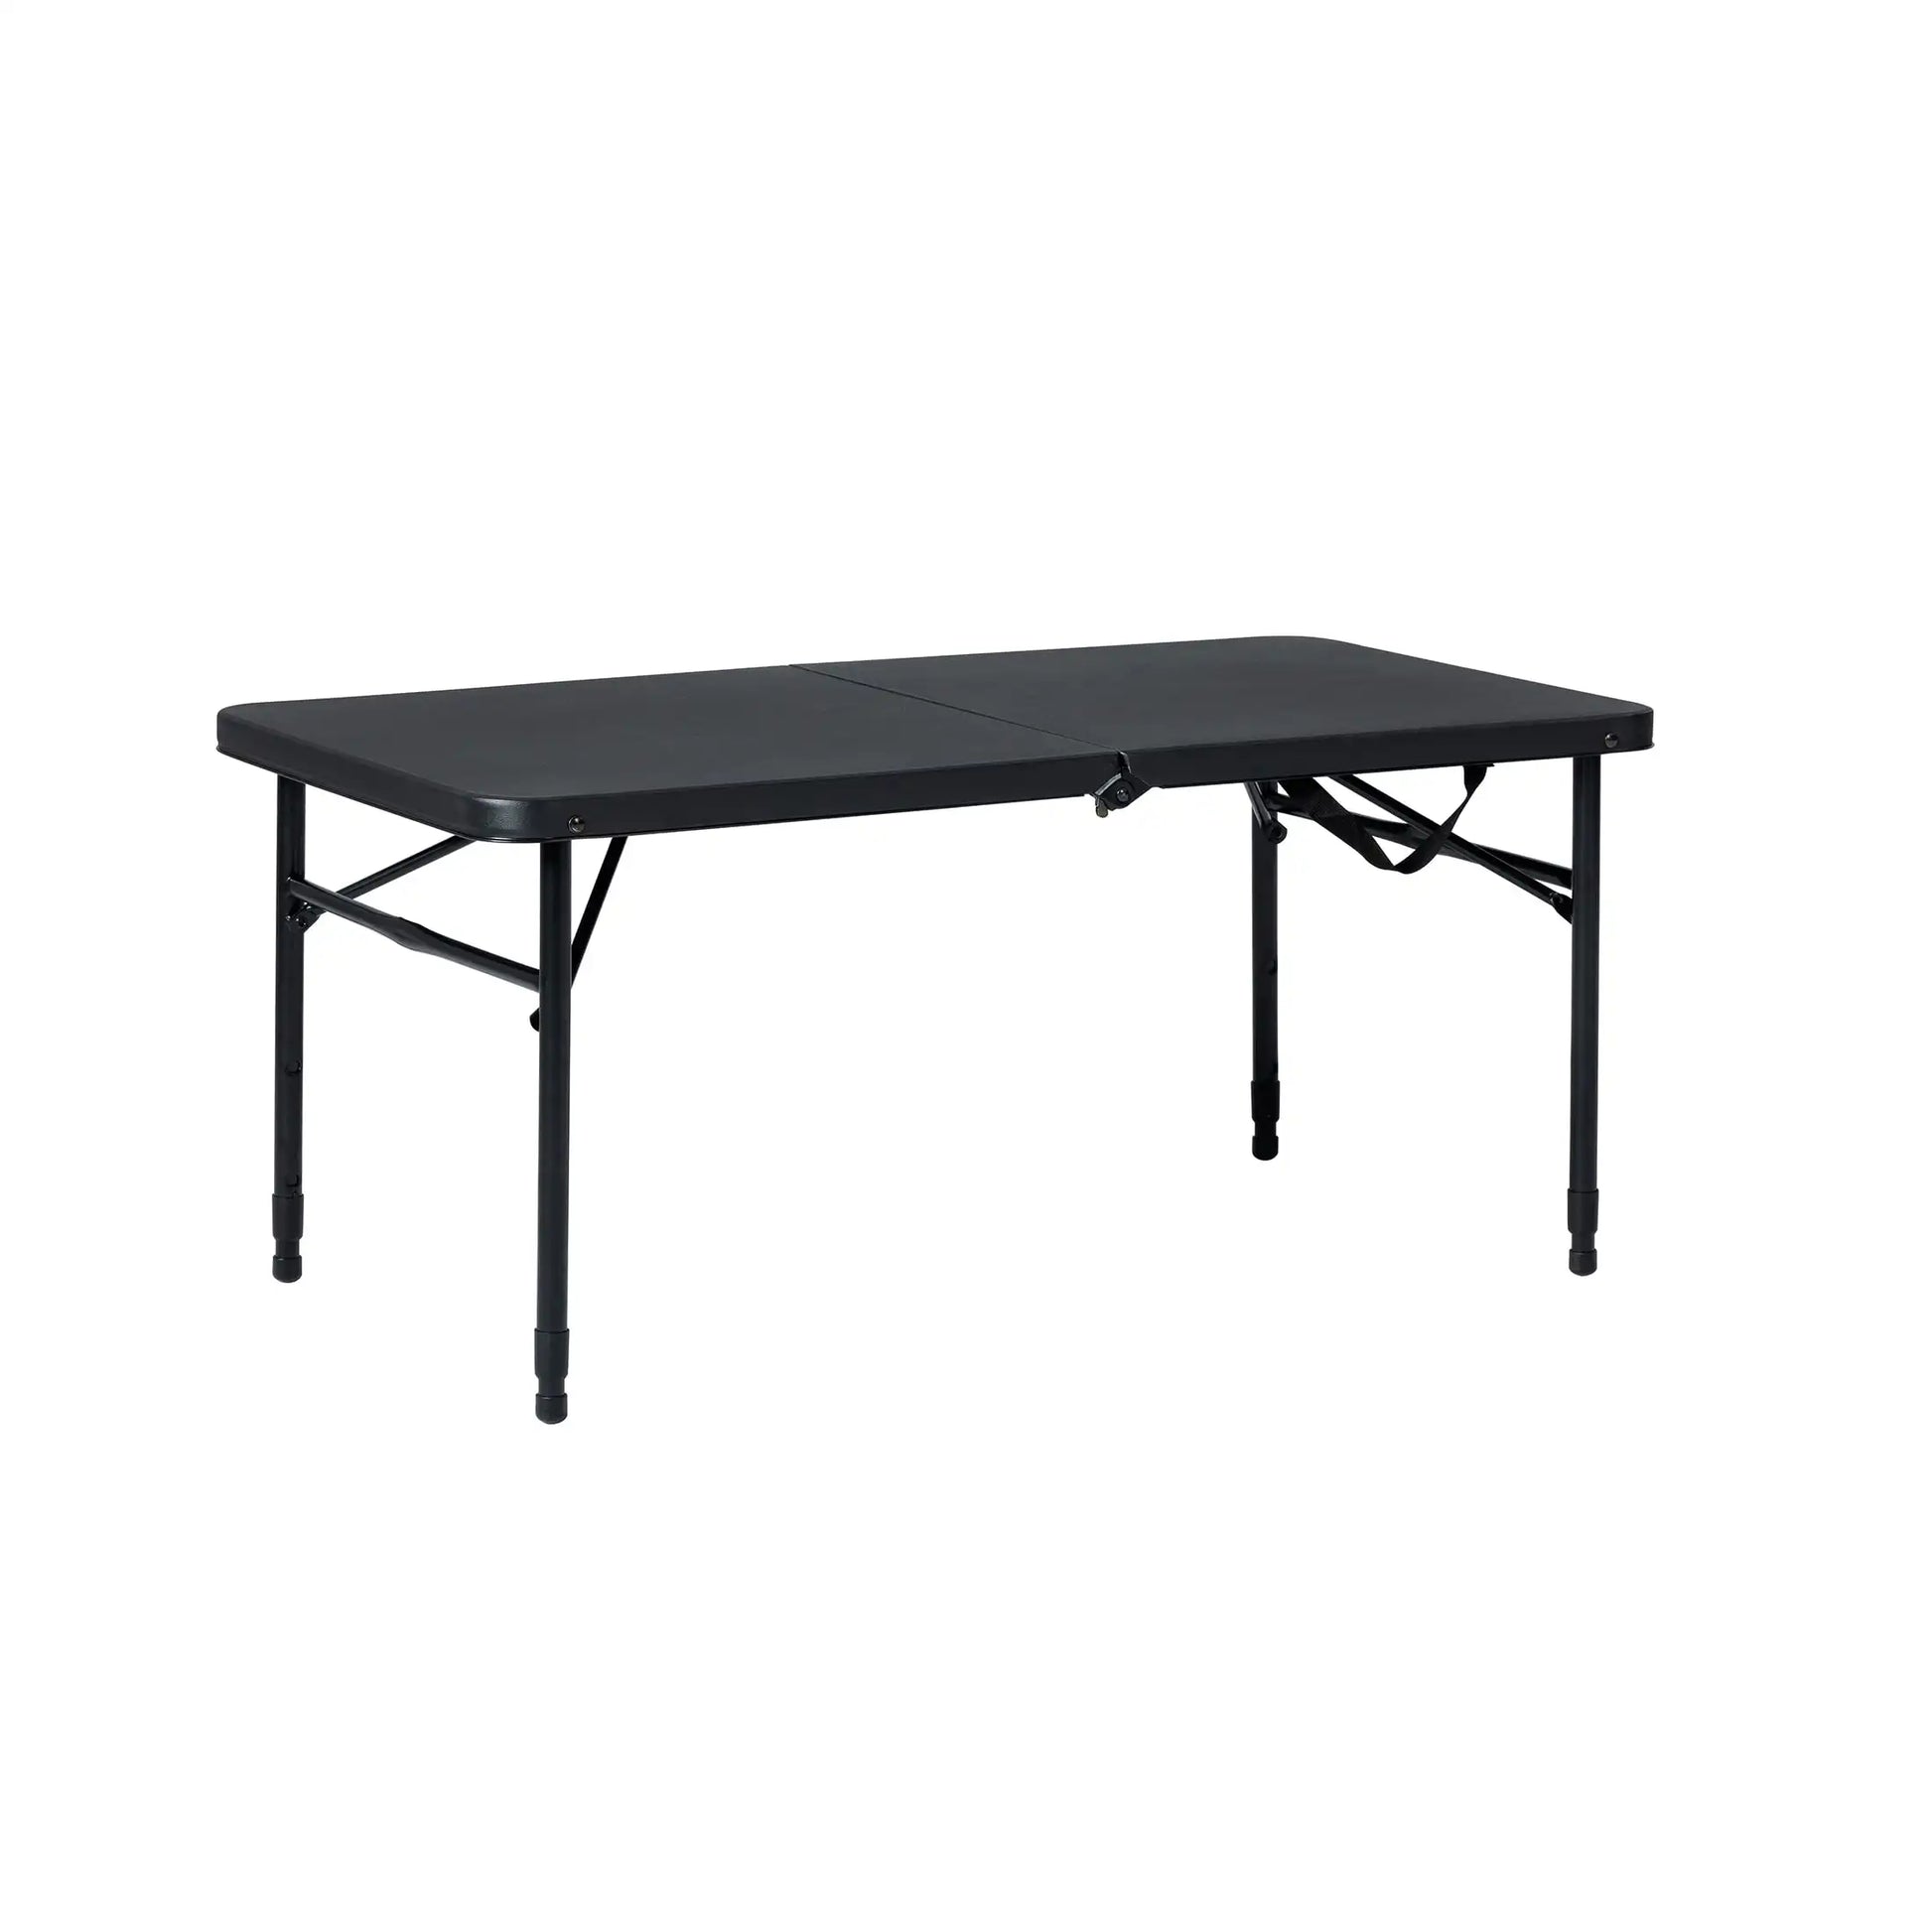 40"L X 20"W Plastic Adjustable Height Fold-In-Half Folding Table, Rich Black Folding Table Camping